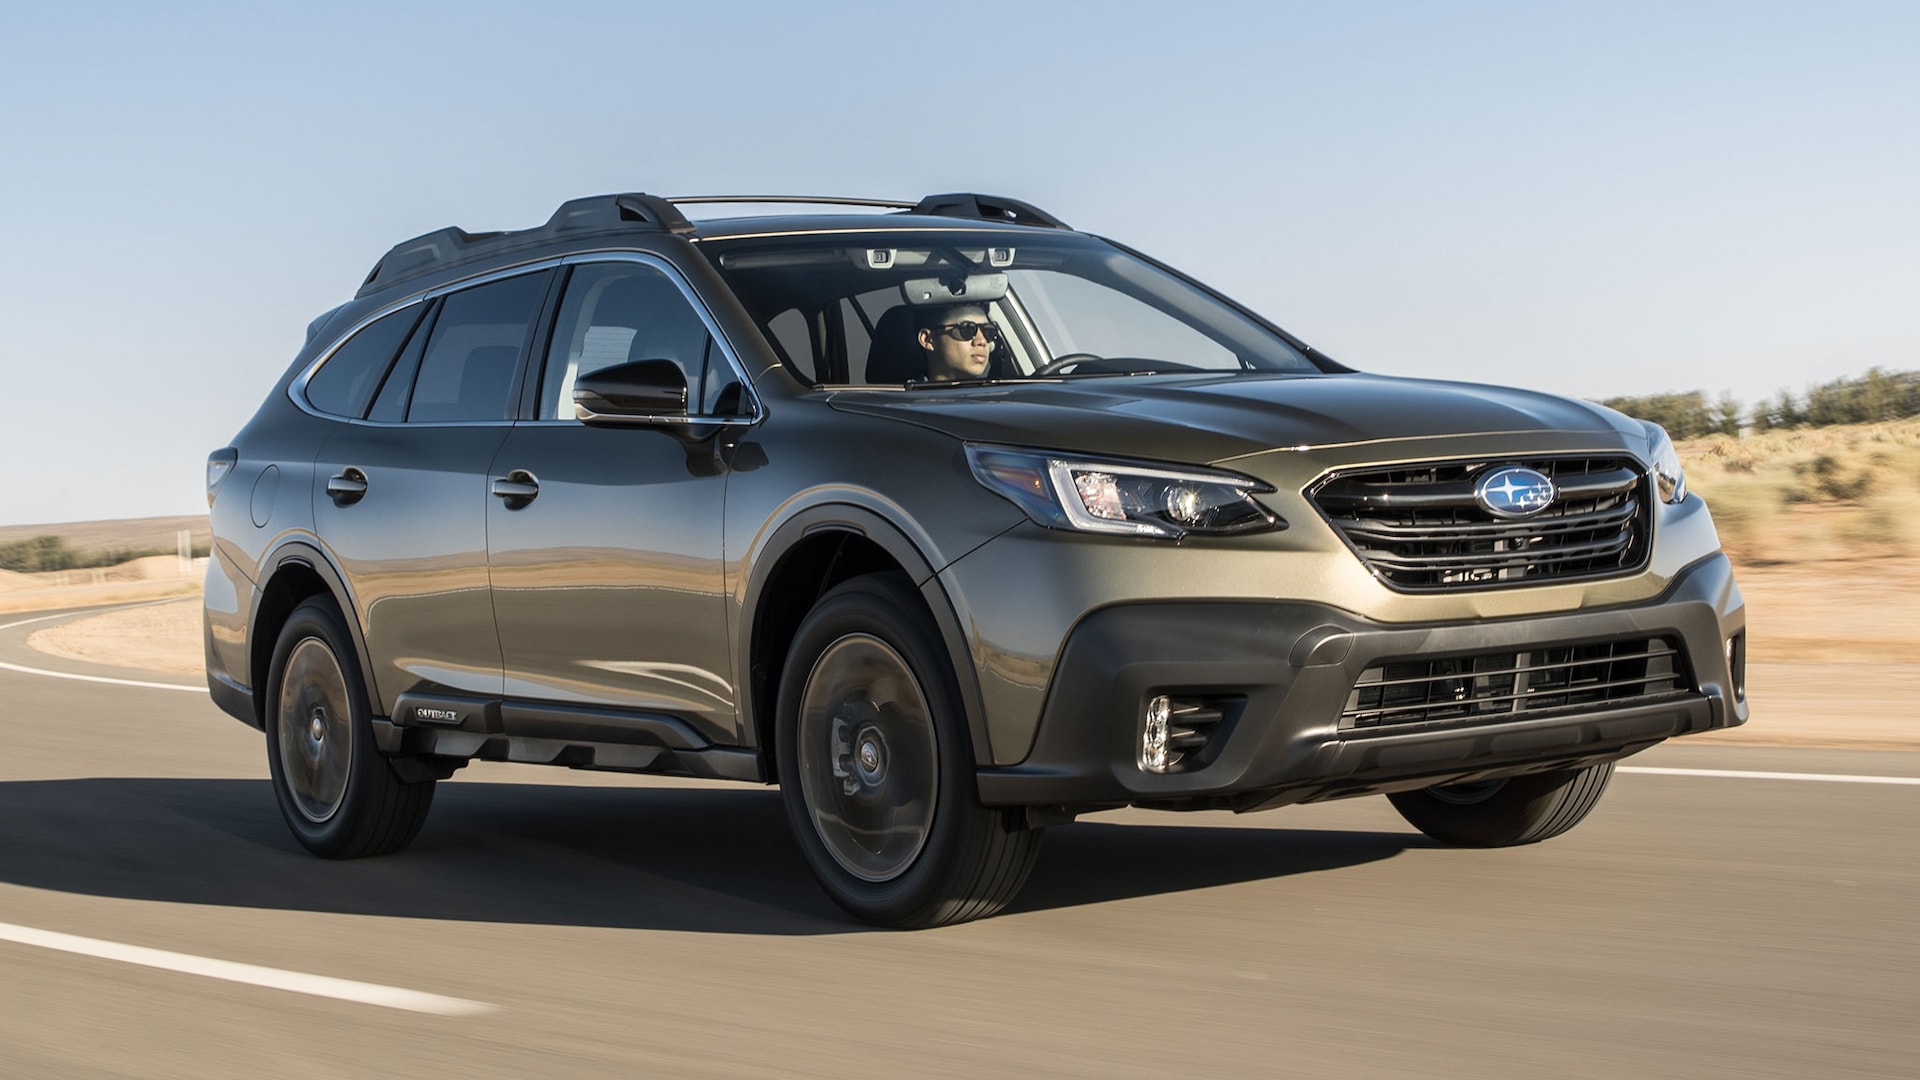 2020 Subaru Outback Pros and Cons Review: This is What Subaru Could Improve